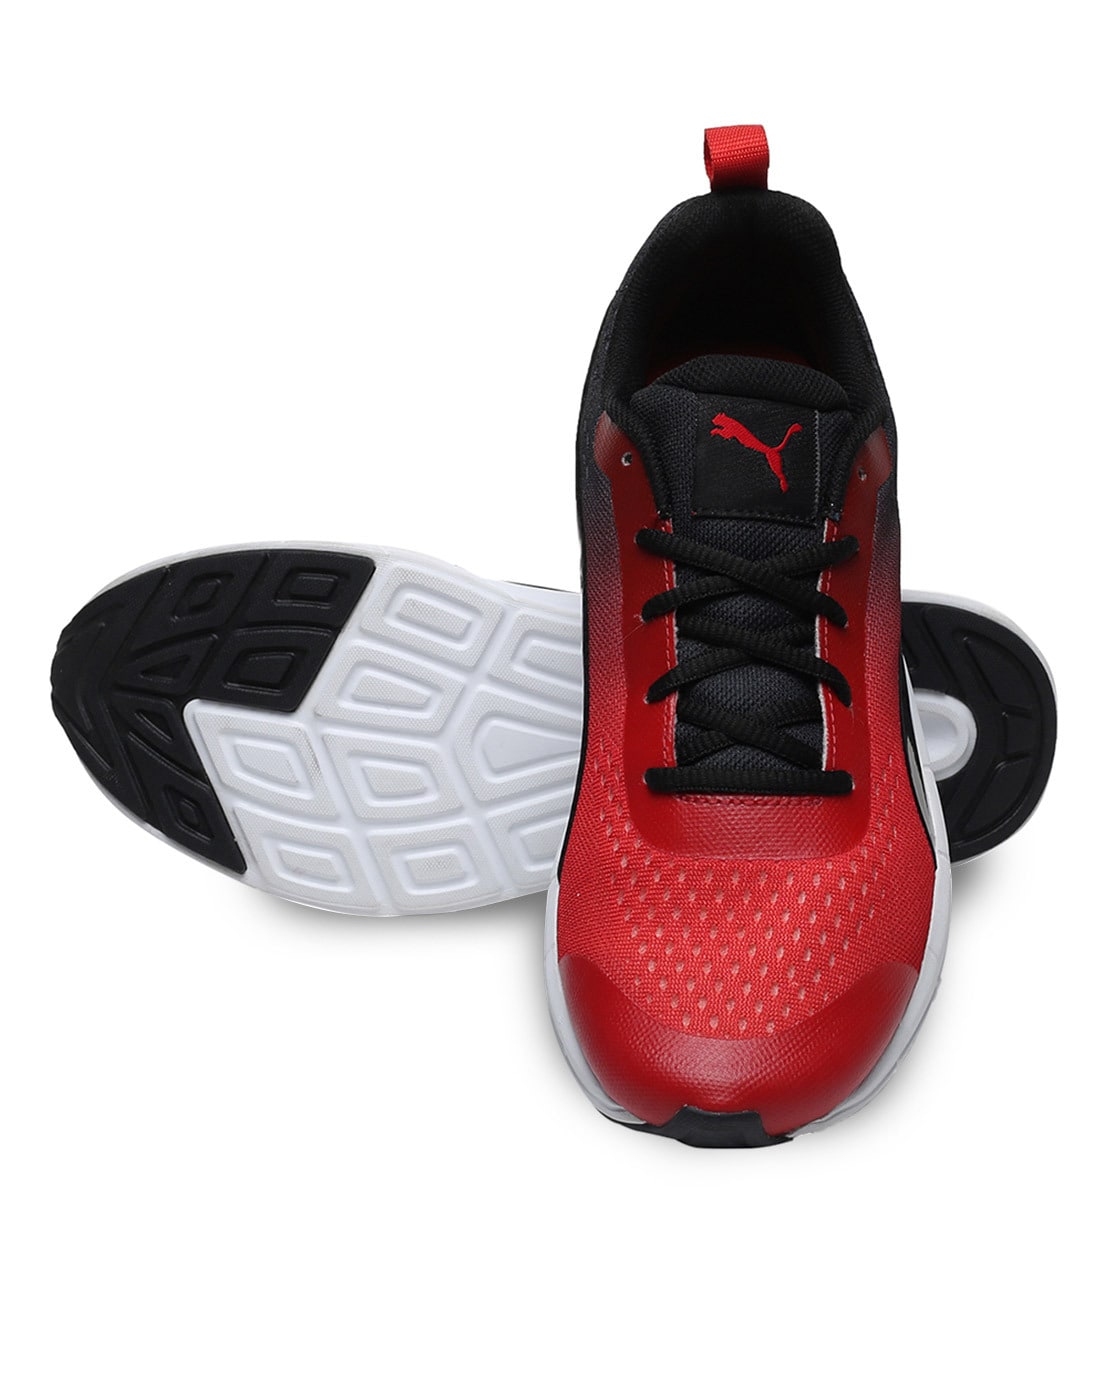 puma running shoes black and red